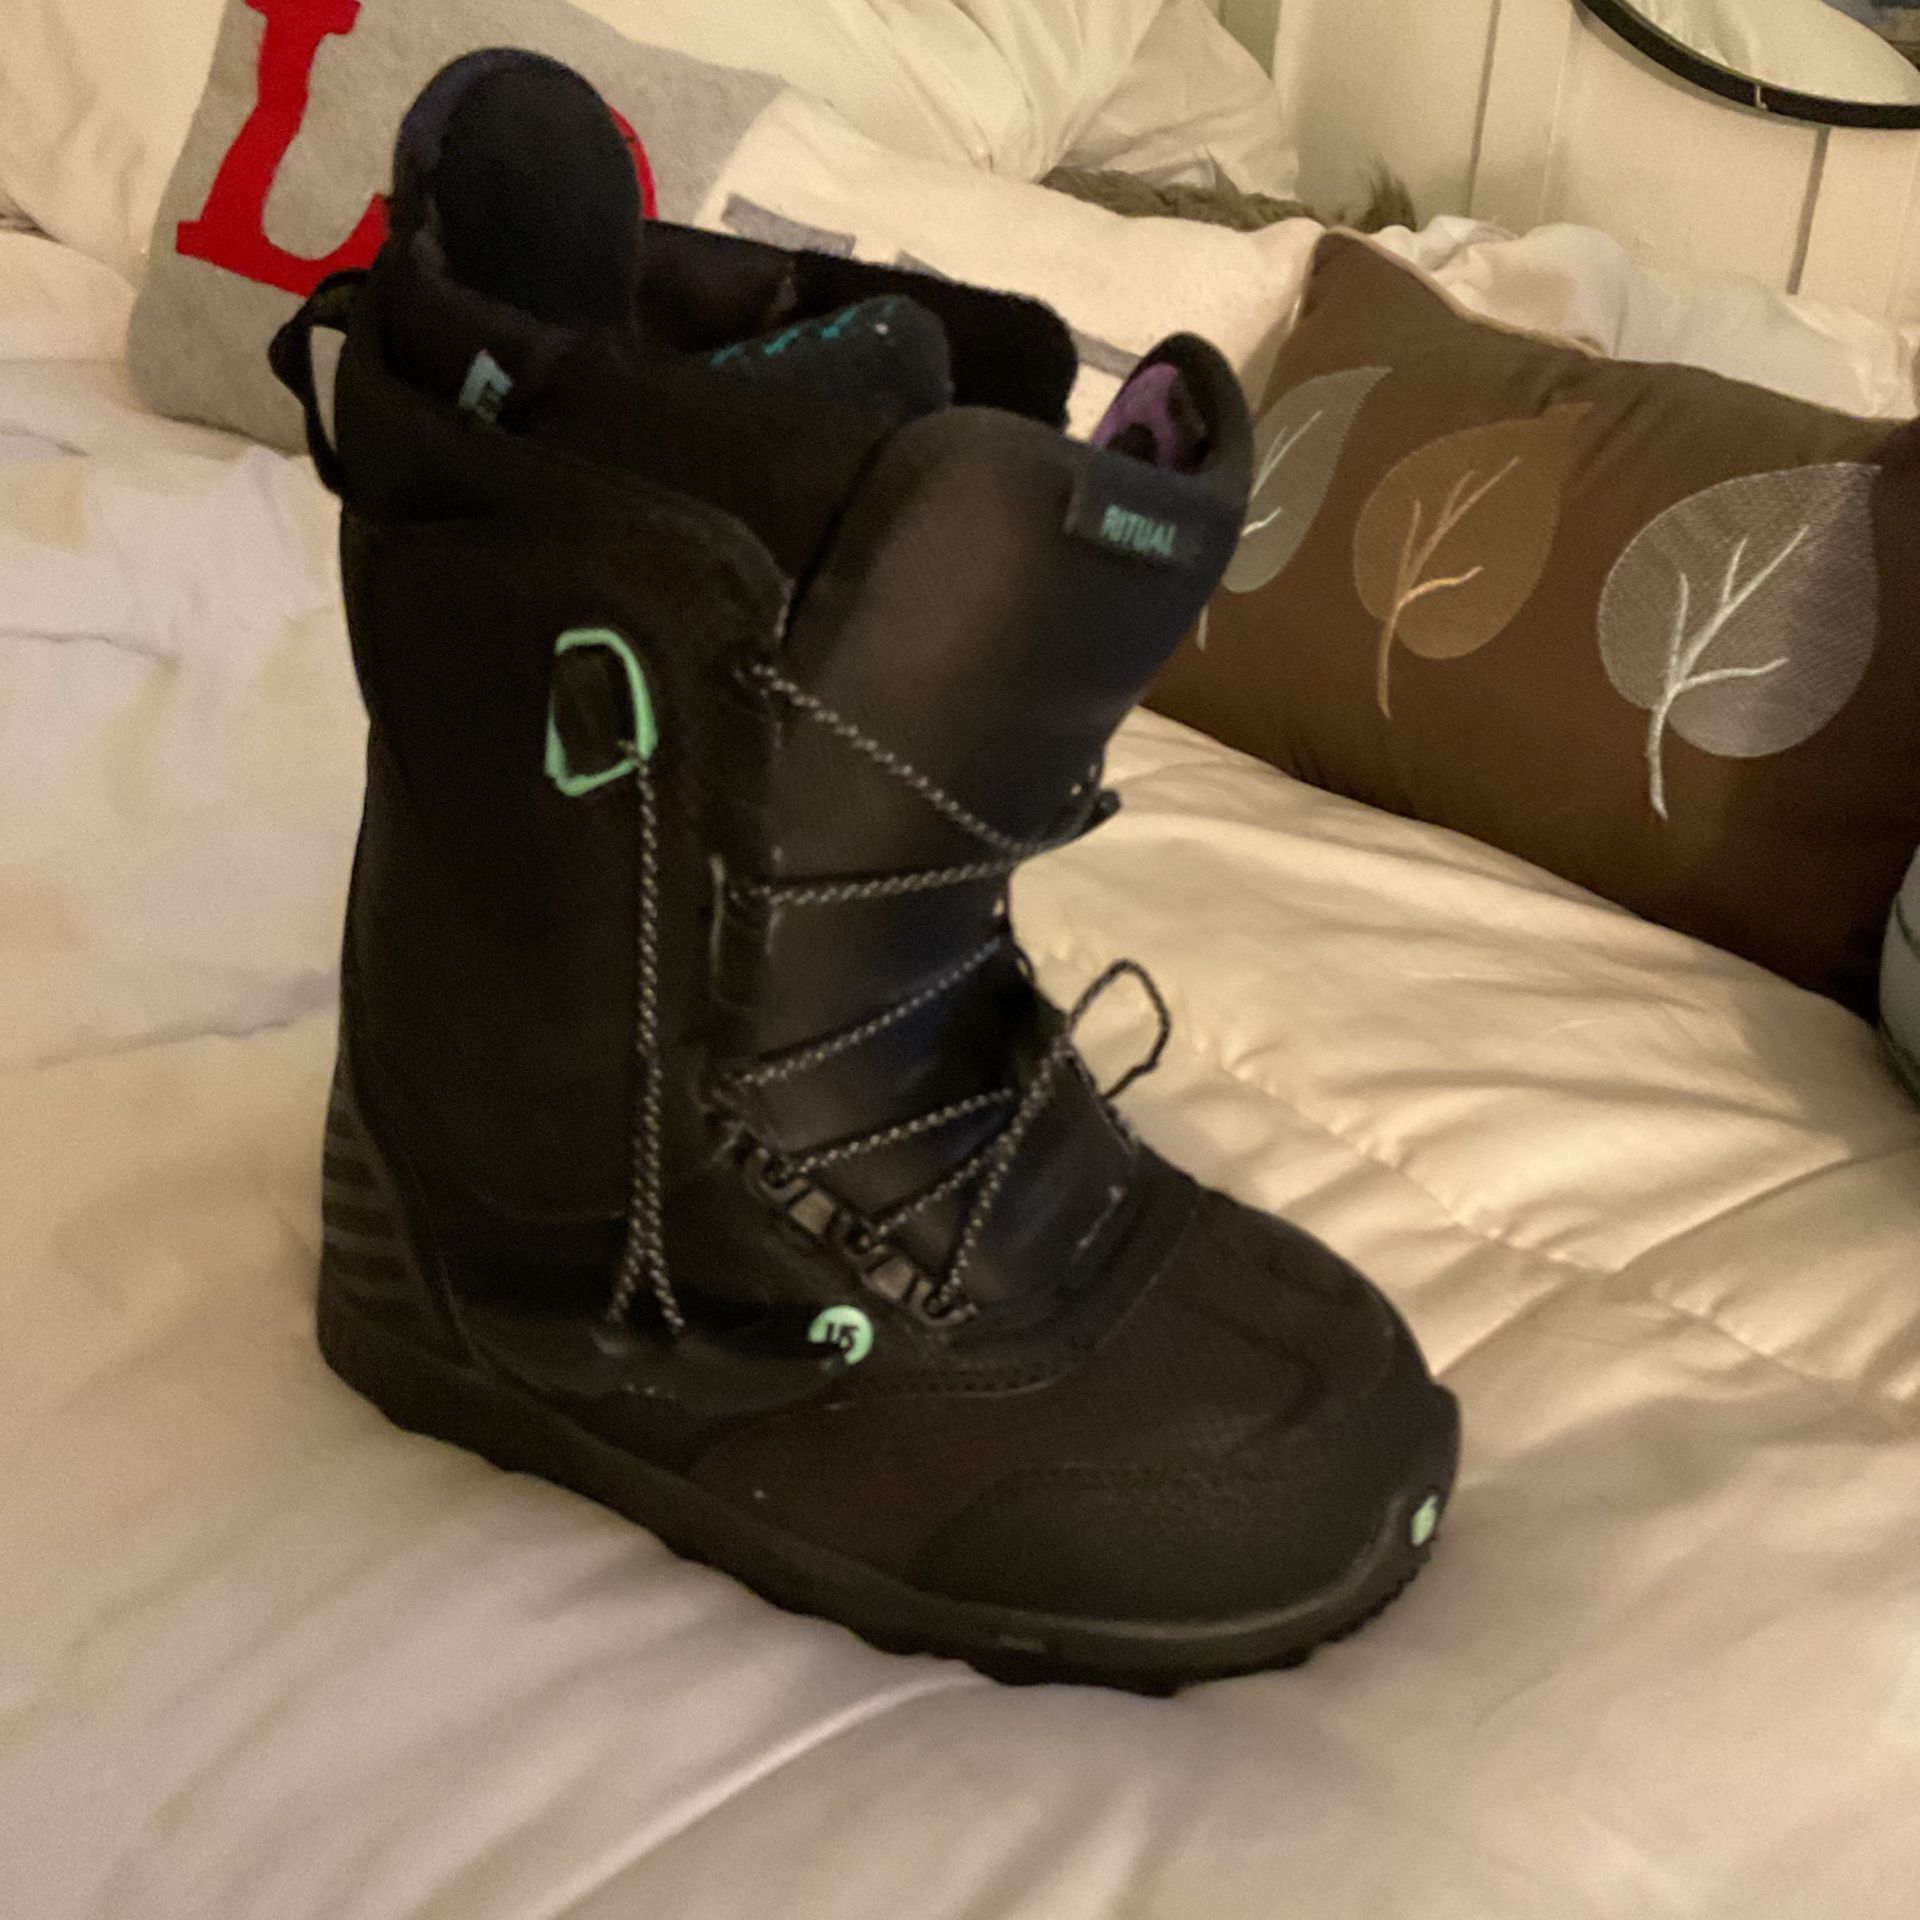 Burton snowboarding boots size 5 just reduced